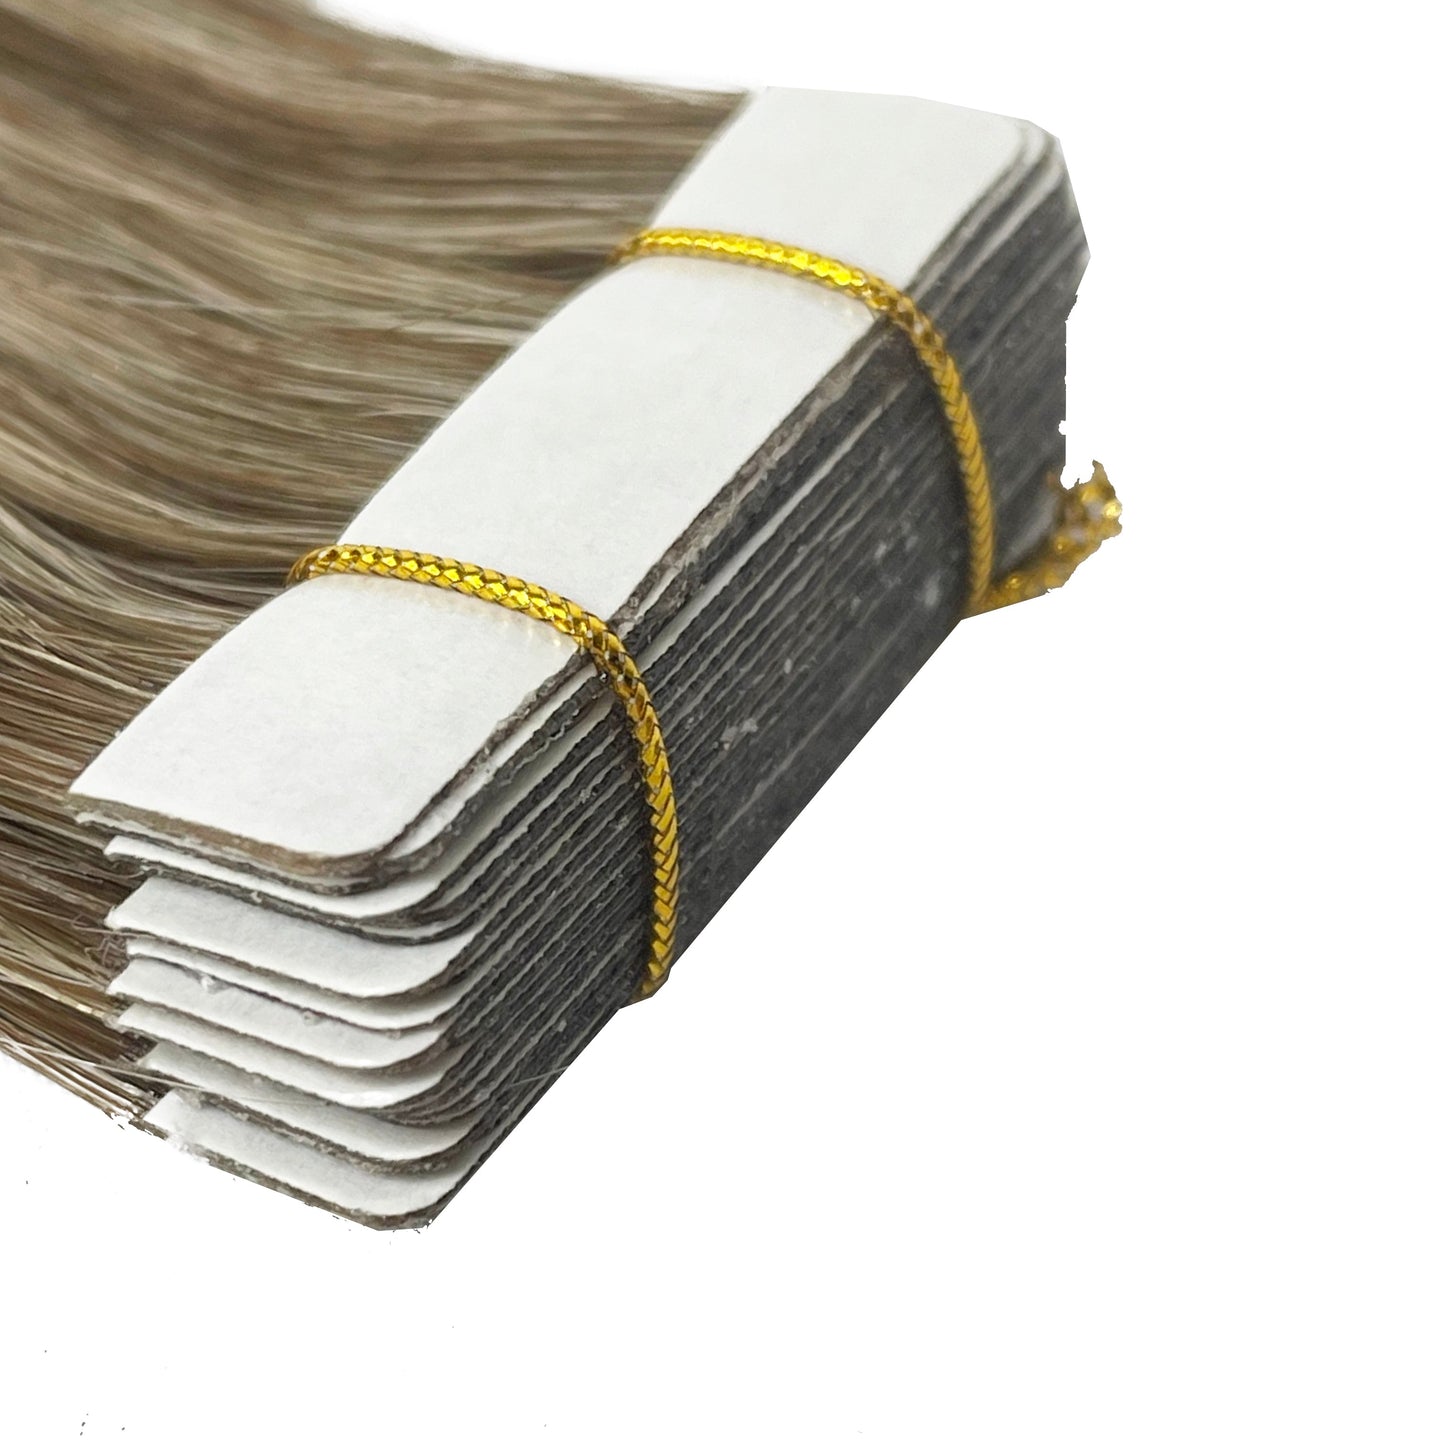 10A Straight Tape-In Human Hair Extension Color #4/613